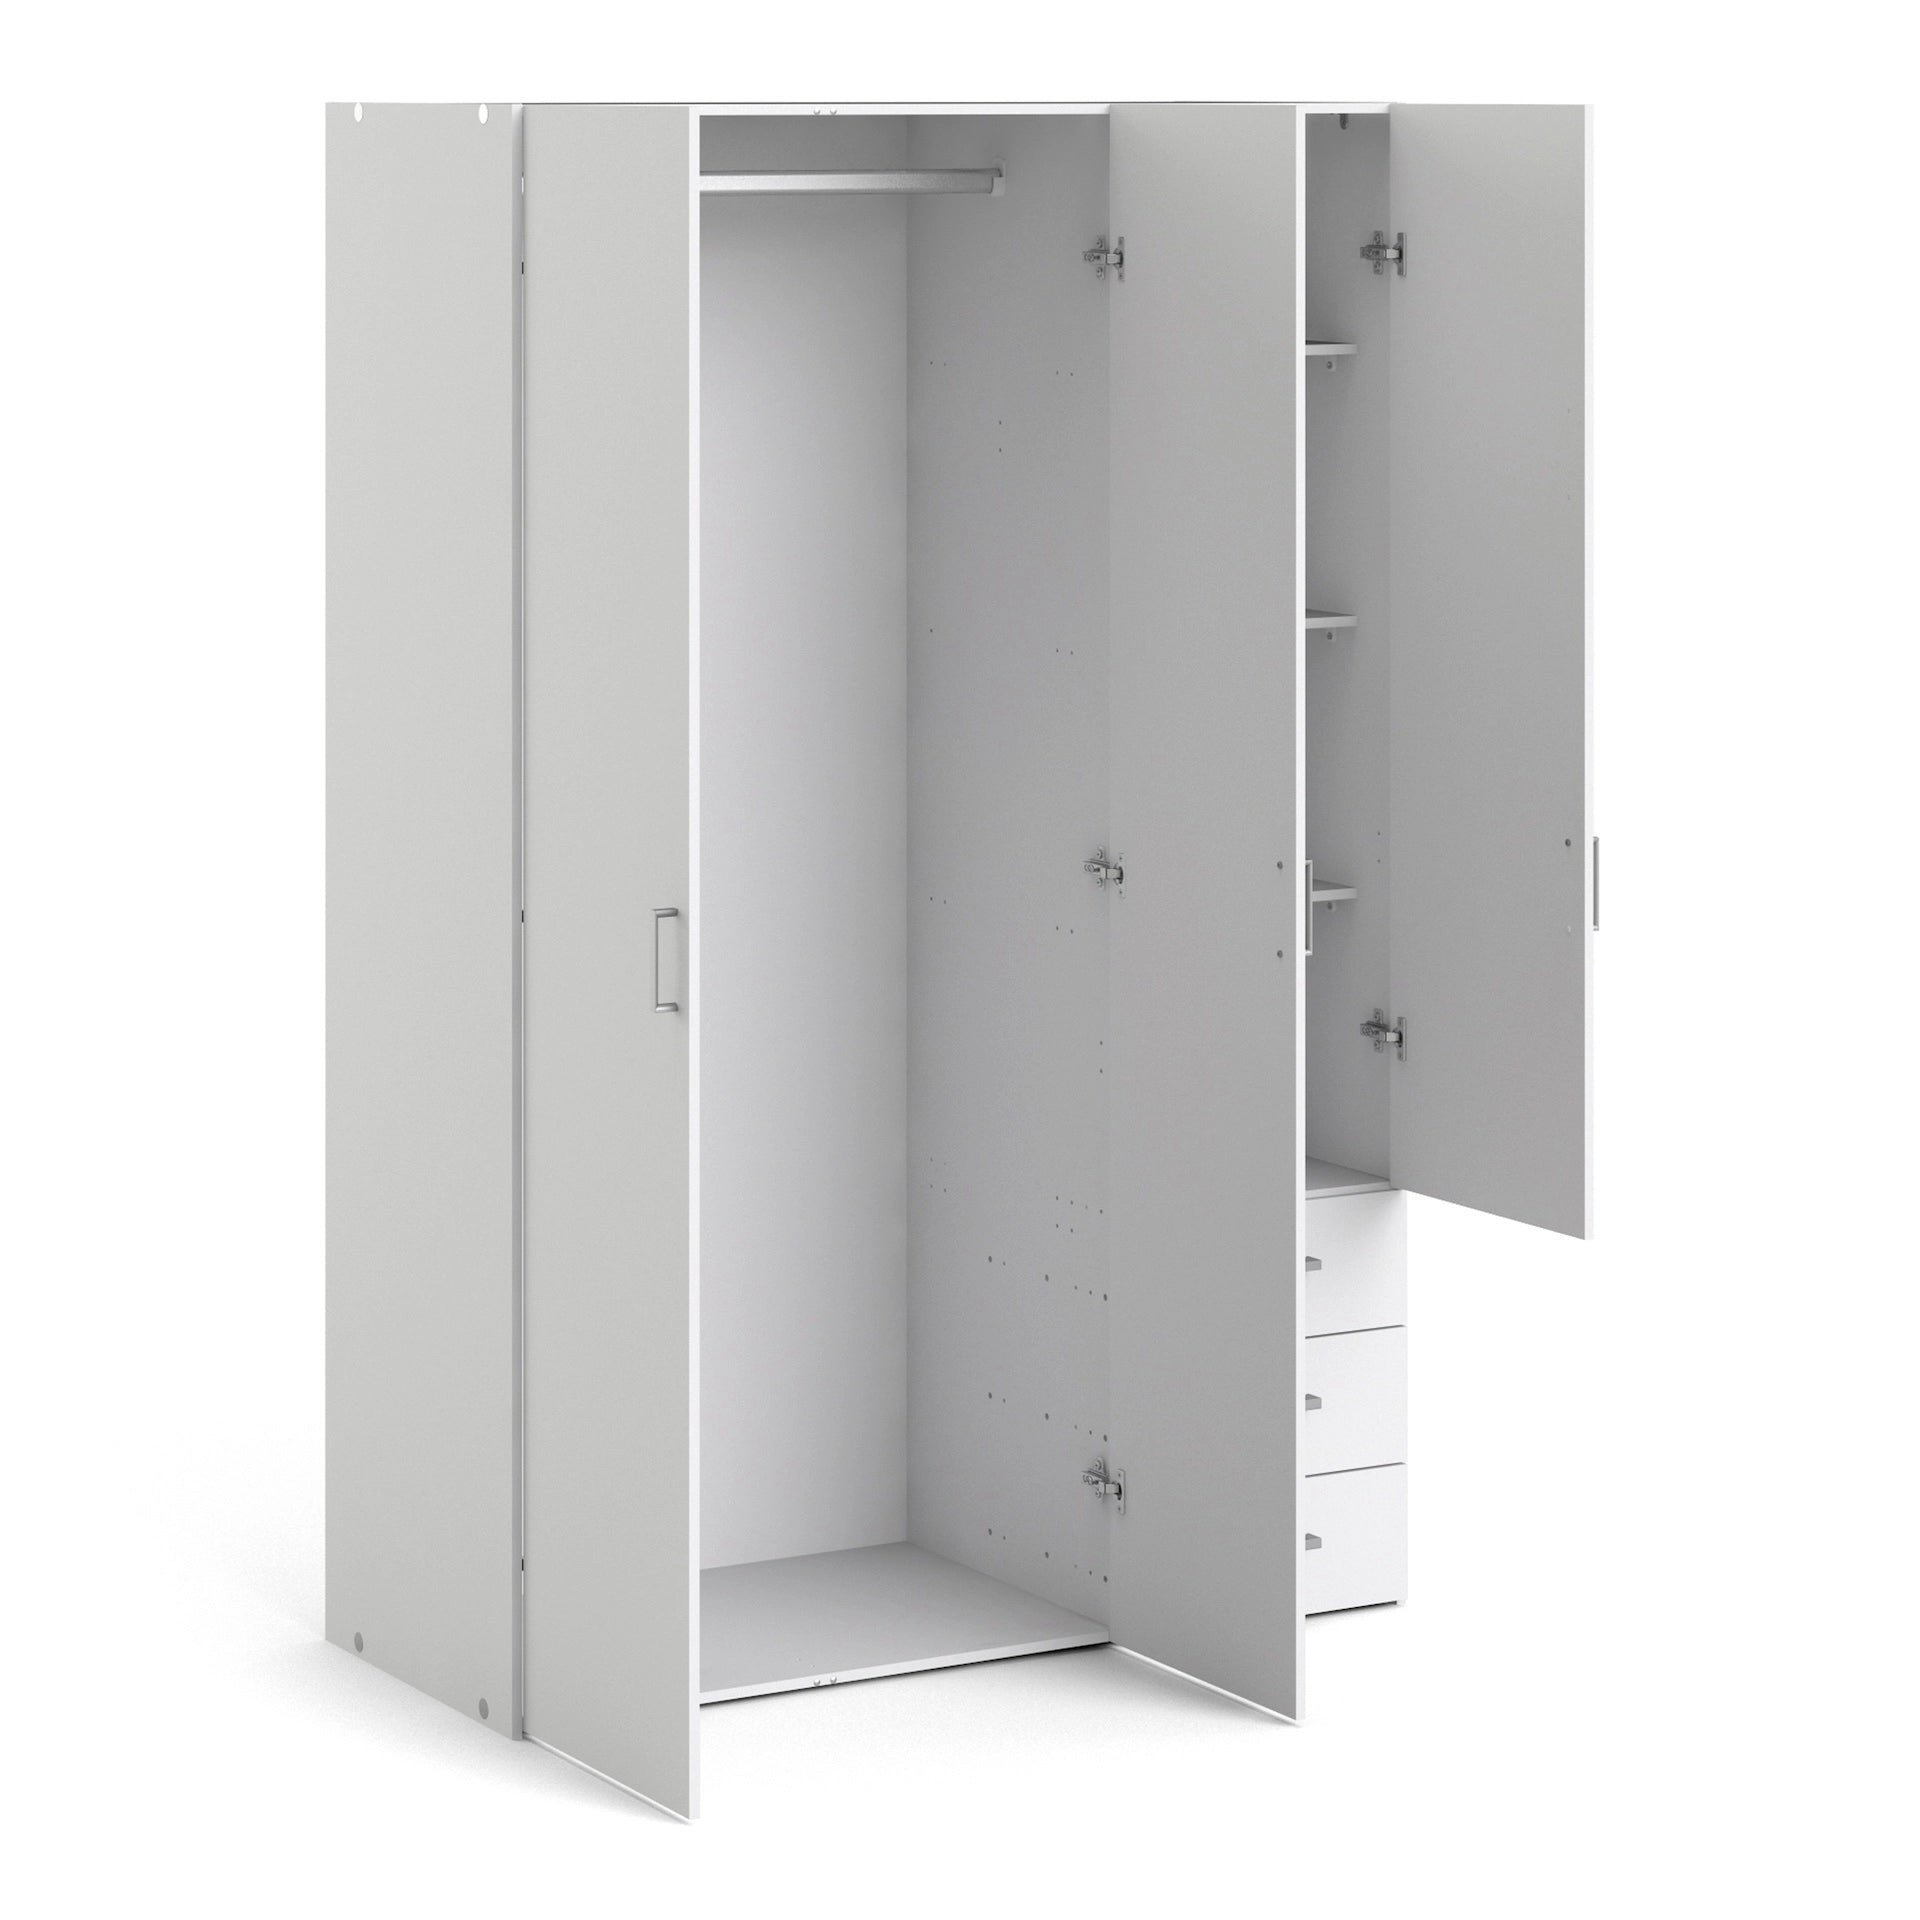 Furniture To Go Space Wardrobe with 3 Doors + 3 Drawers White 1750